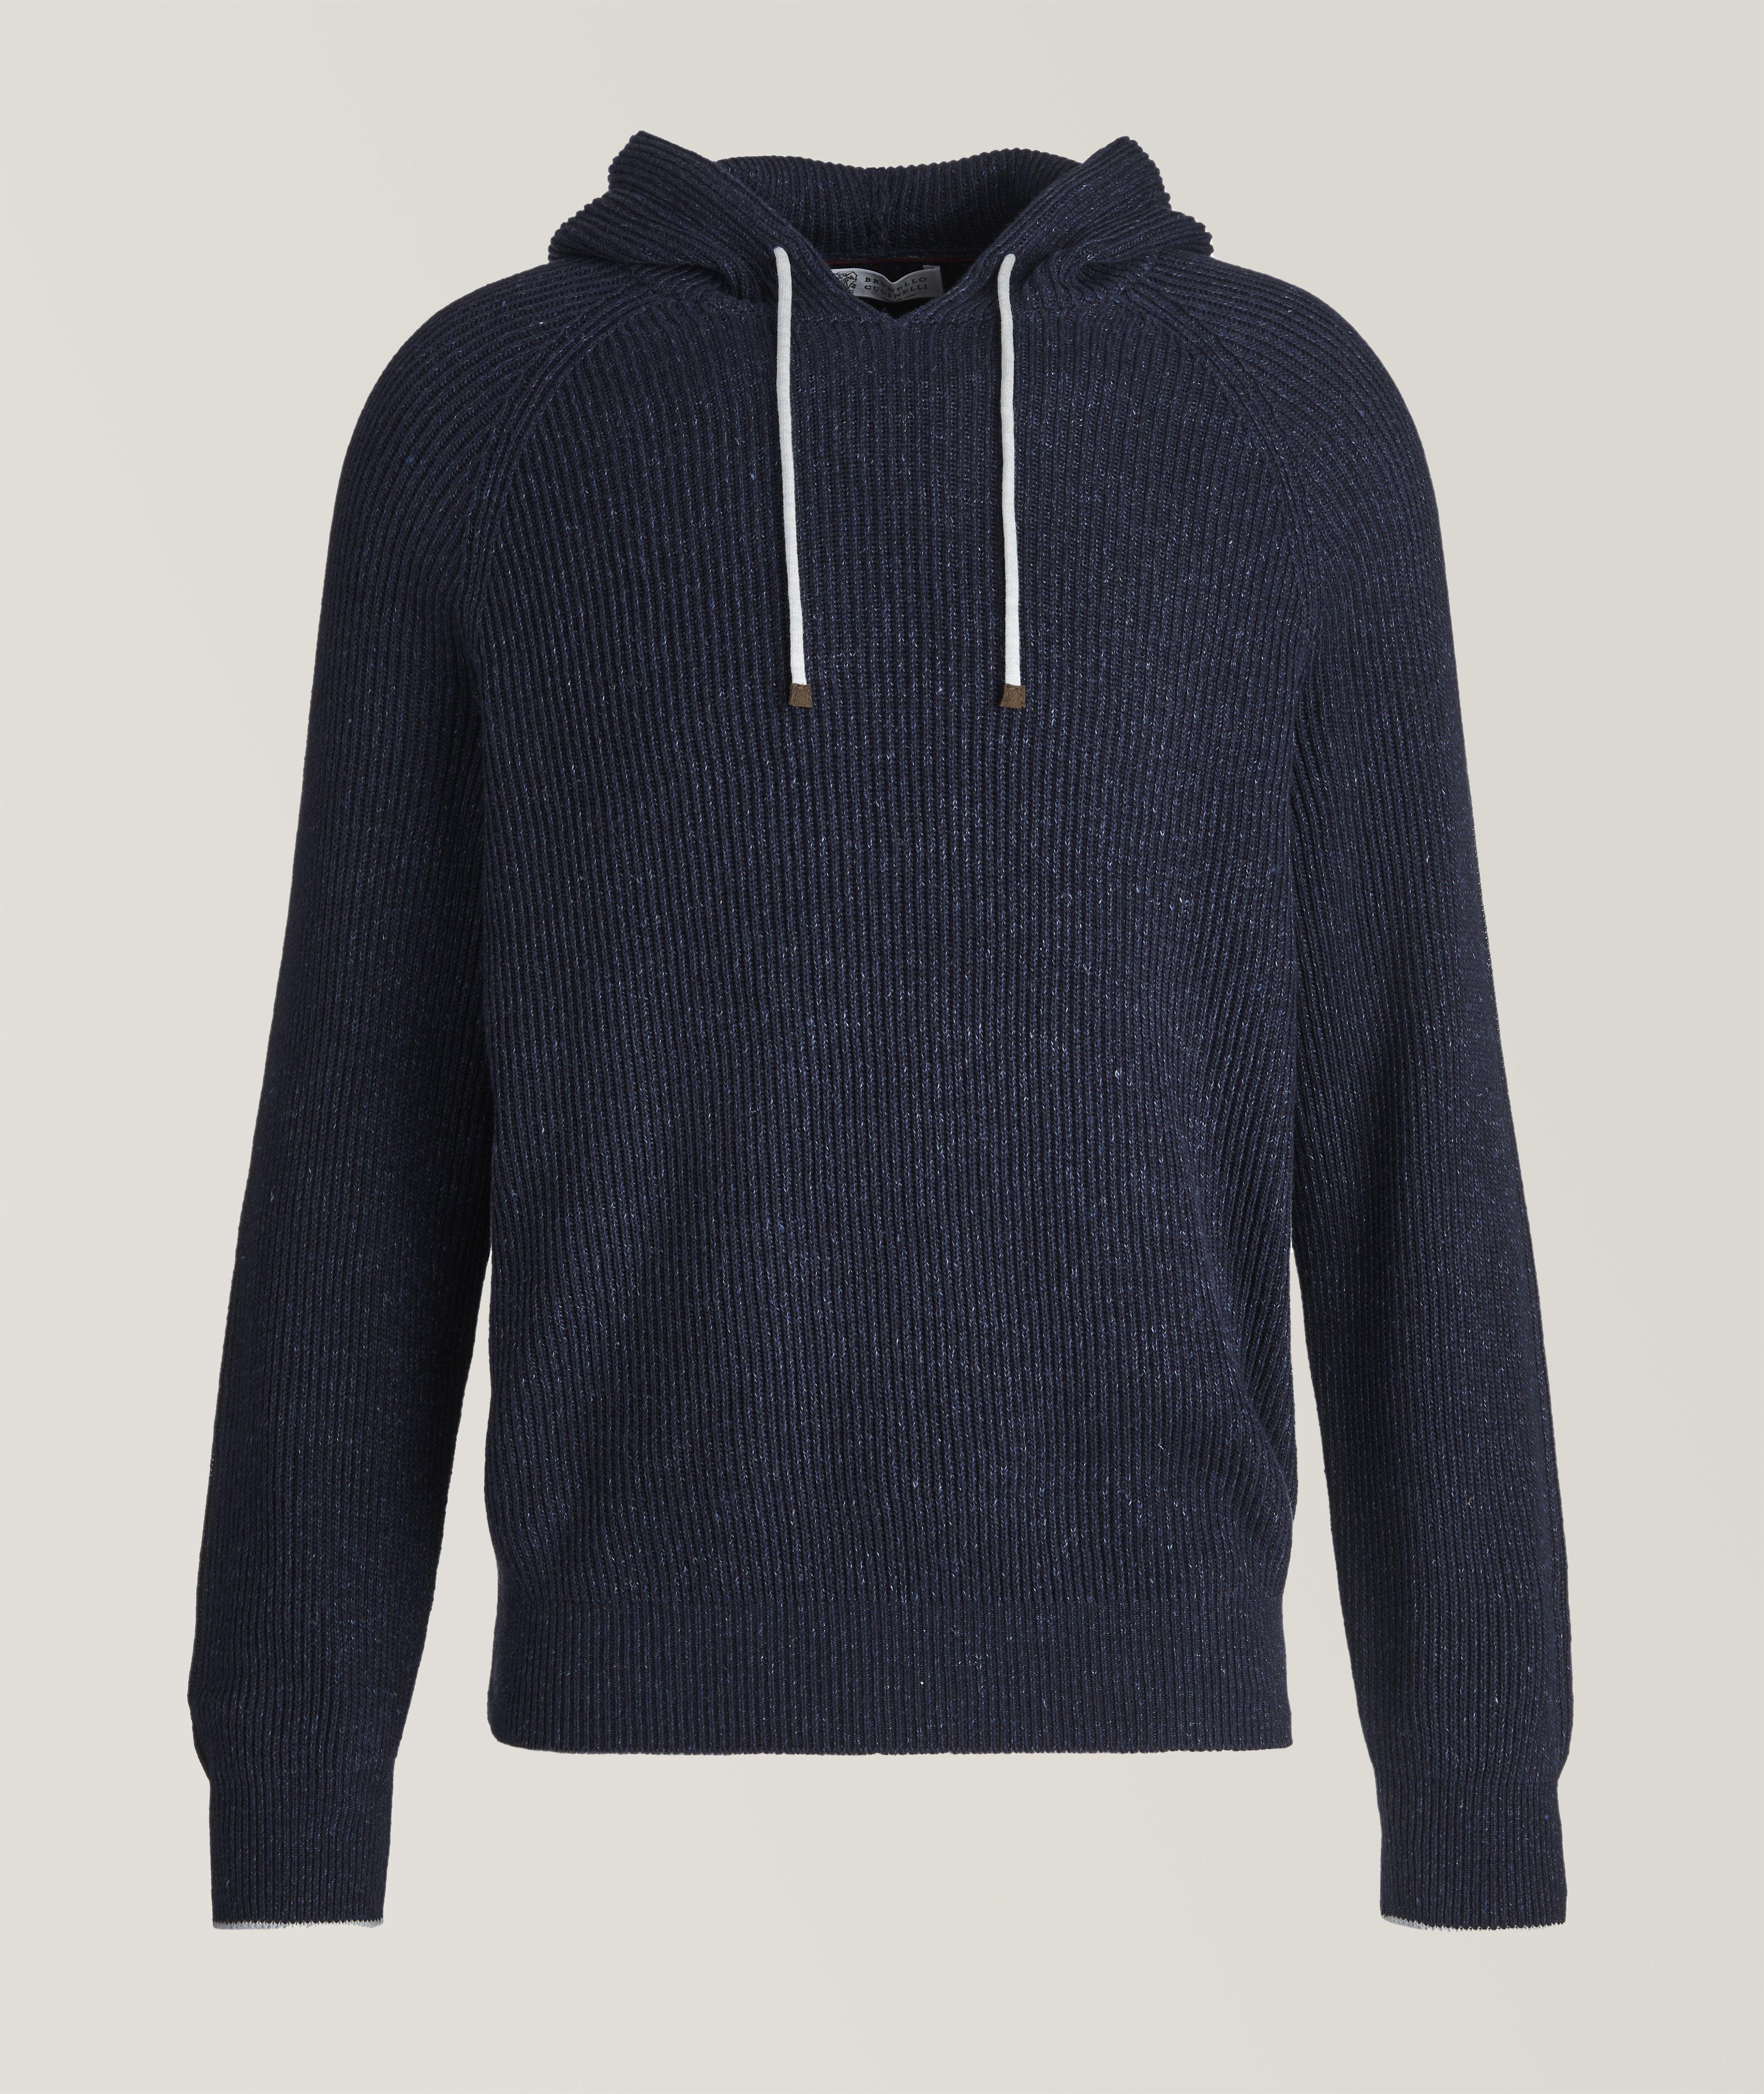 Cotton-Linen Rib knit Hooded Pullover image 0